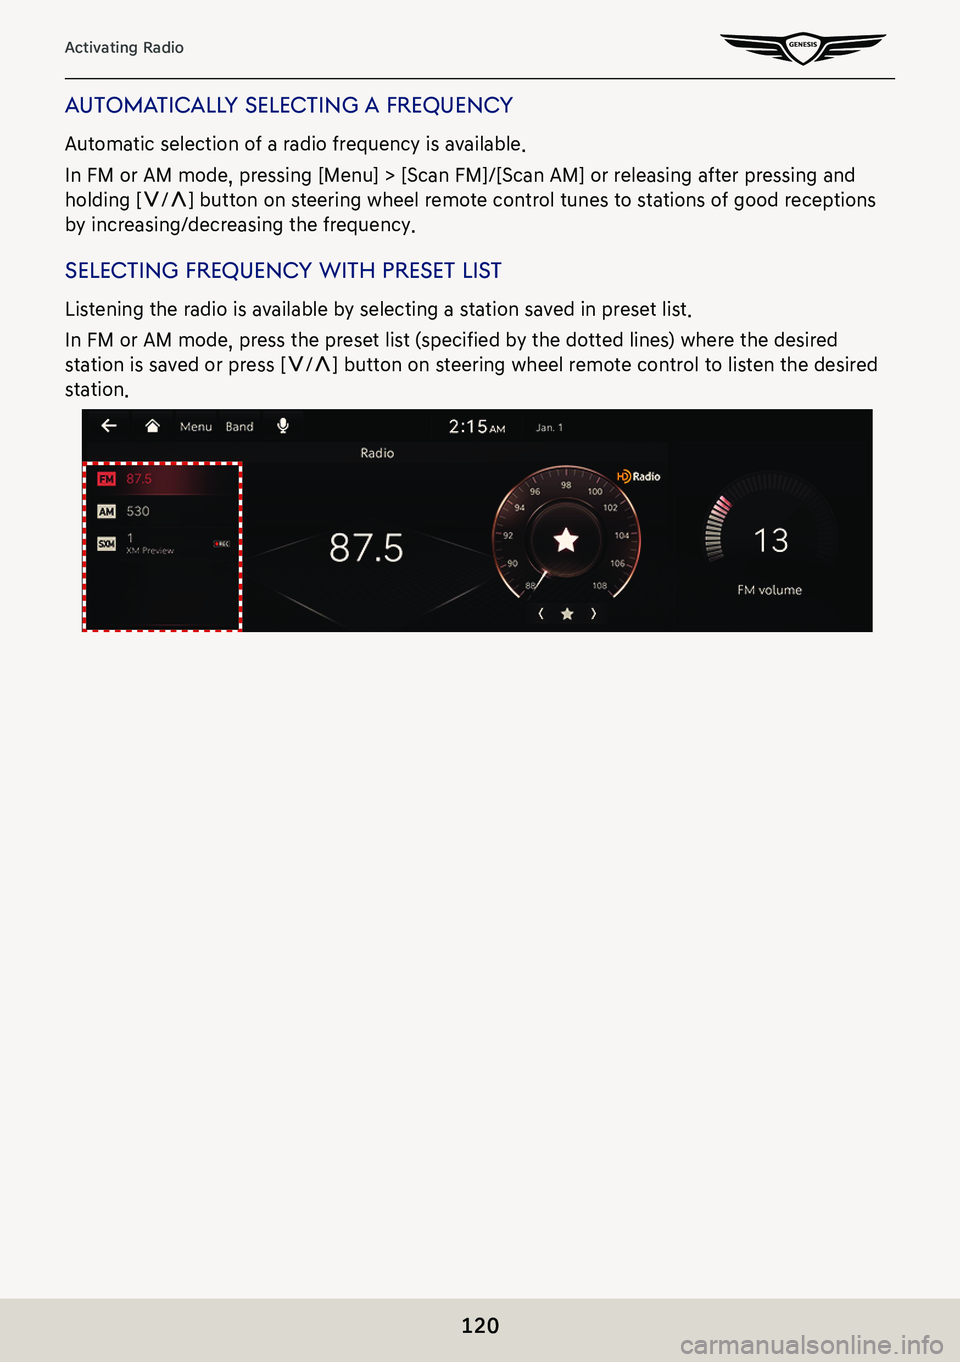 GENESIS G80 2021  Premium Navigation Manual 120
Activating Radio
auToma TicallY selec Ting a frequenc Y
Automatic selection of a radio frequency is available.
In FM or AM mode, pressing [Menu] > [Scan FM]/[Scan AM] or releasing after pressing a